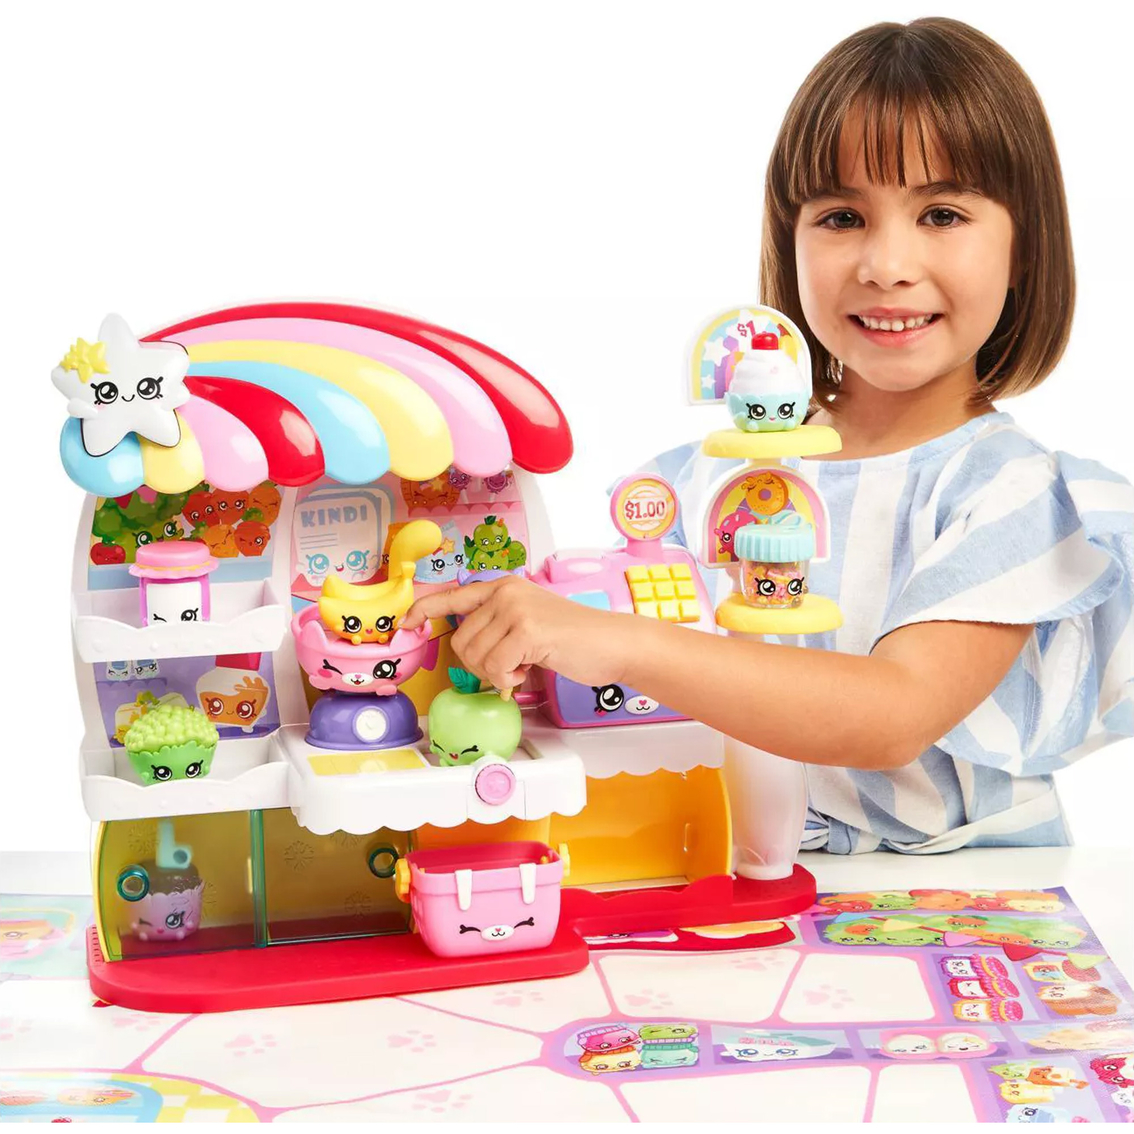 Shopkins Happy Places Happy Home Games Room Laundry Playset Moose